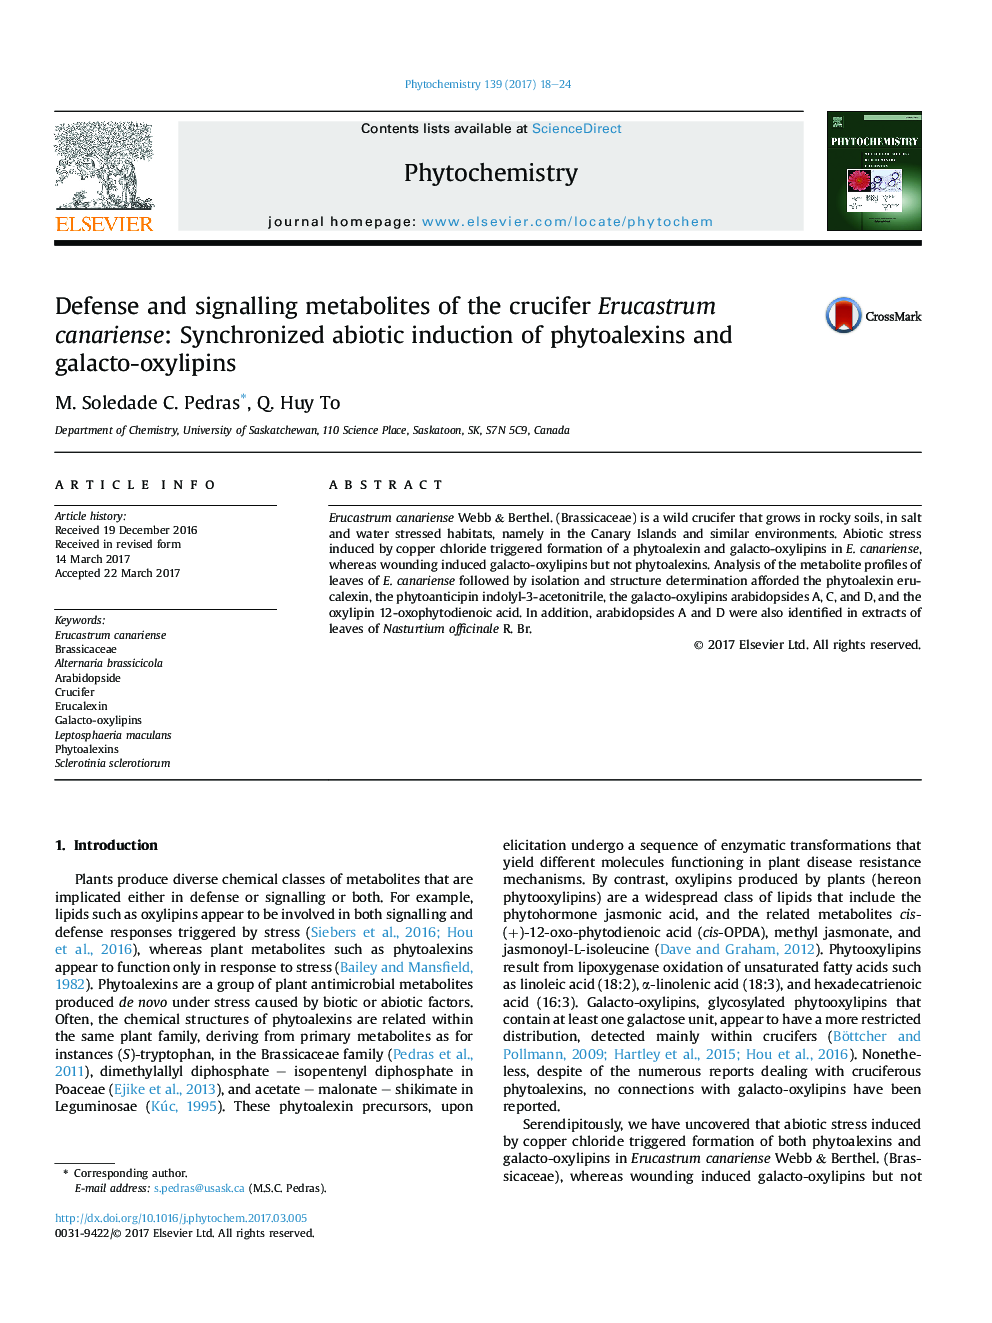 Defense and signalling metabolites of the crucifer Erucastrum canariense: Synchronized abiotic induction of phytoalexins and galacto-oxylipins